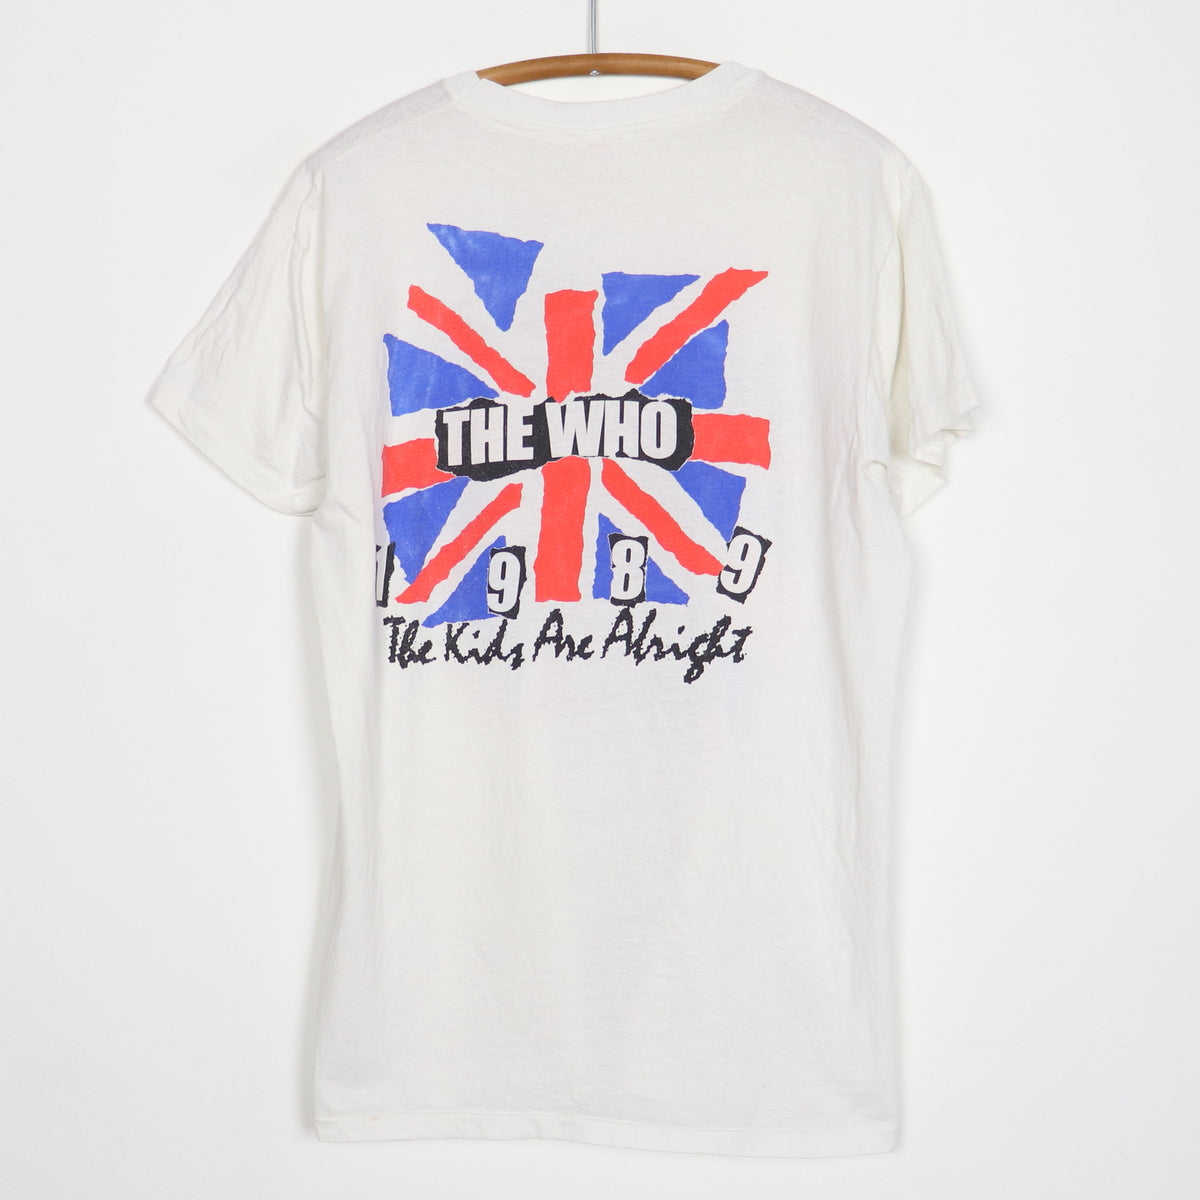 1989 The Who The Kids Are Alright Shirt